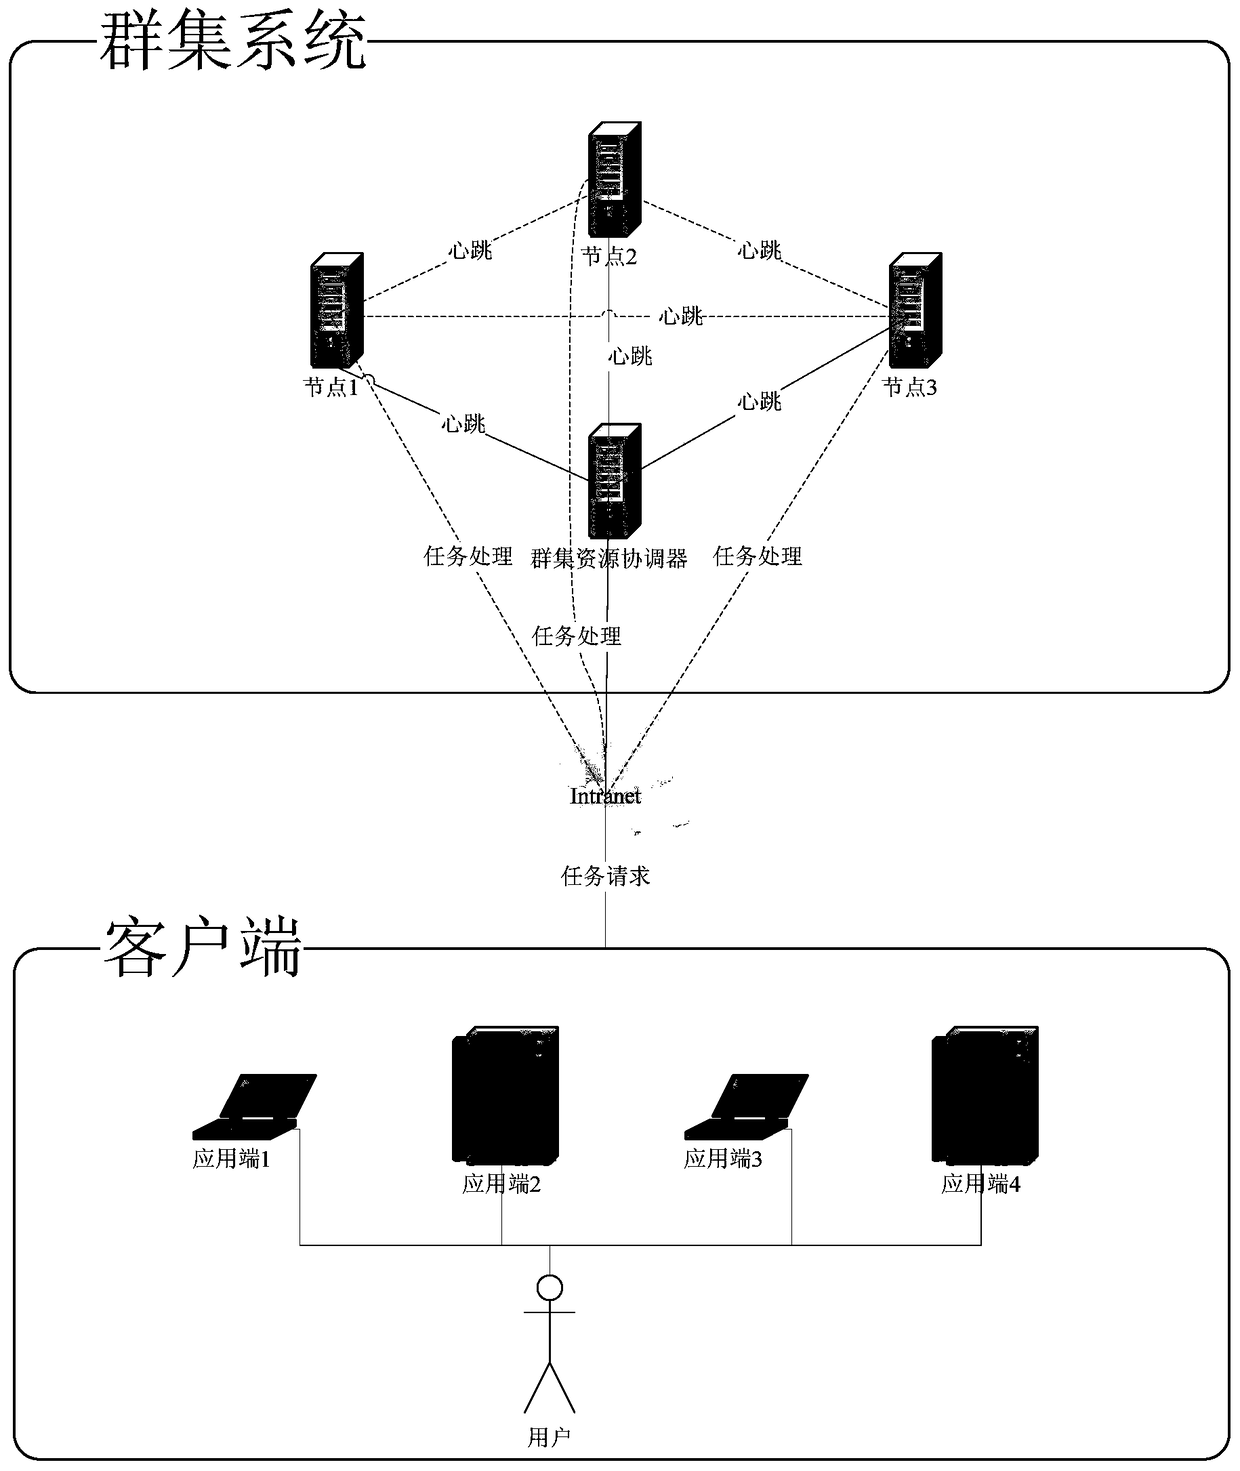 Cluster resource control method used in complex production management system